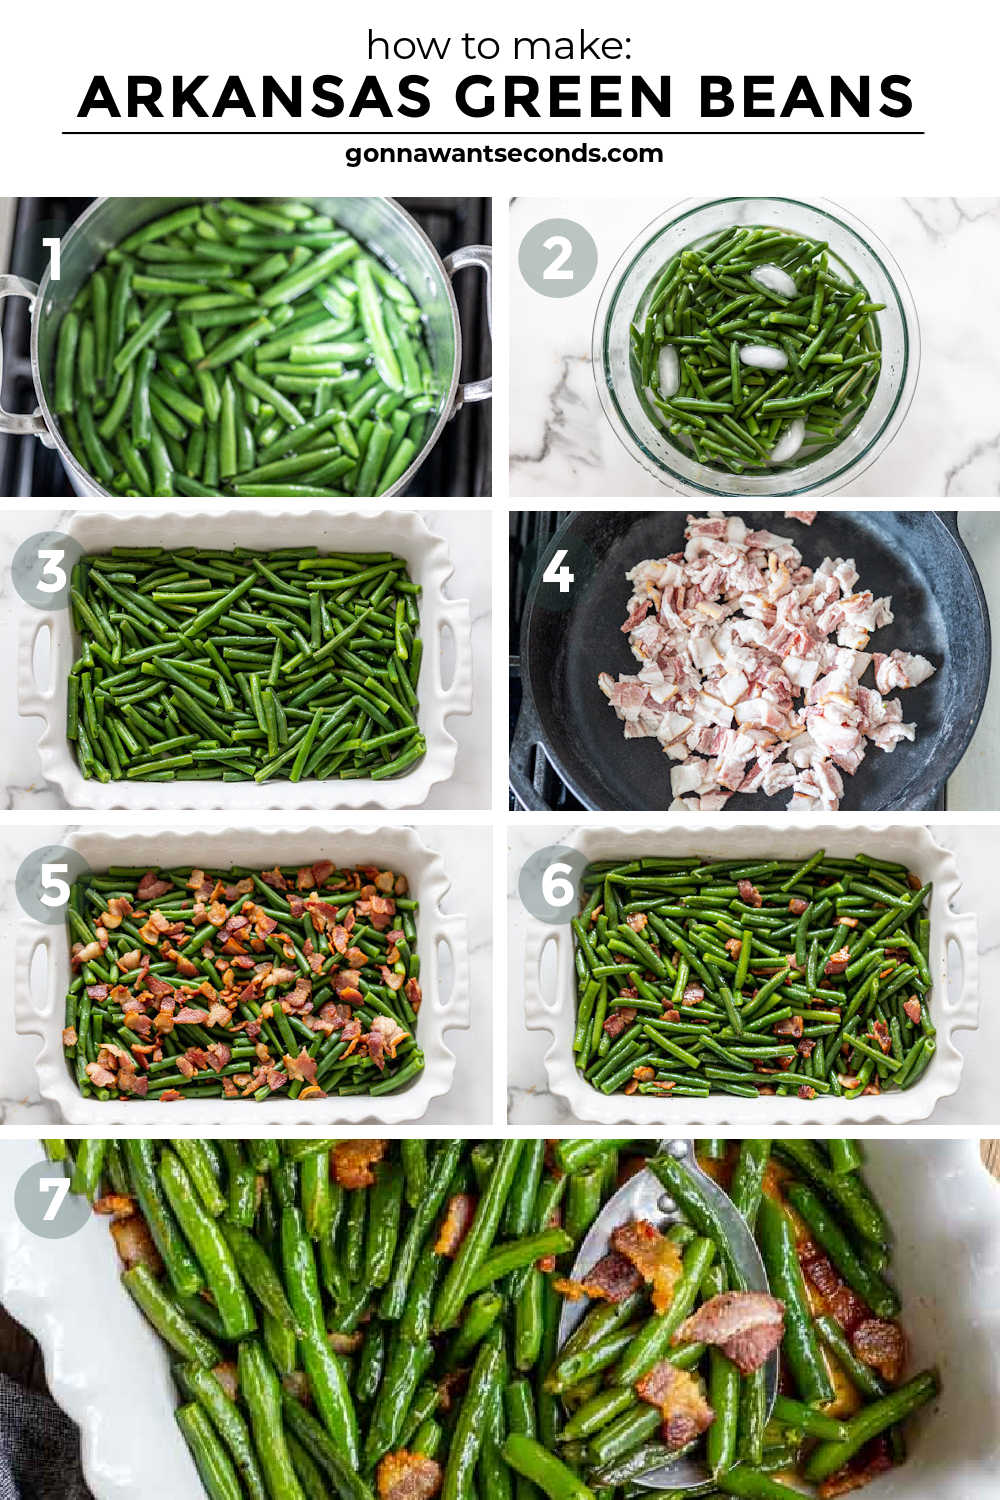 step by step how to make arkansas green beans